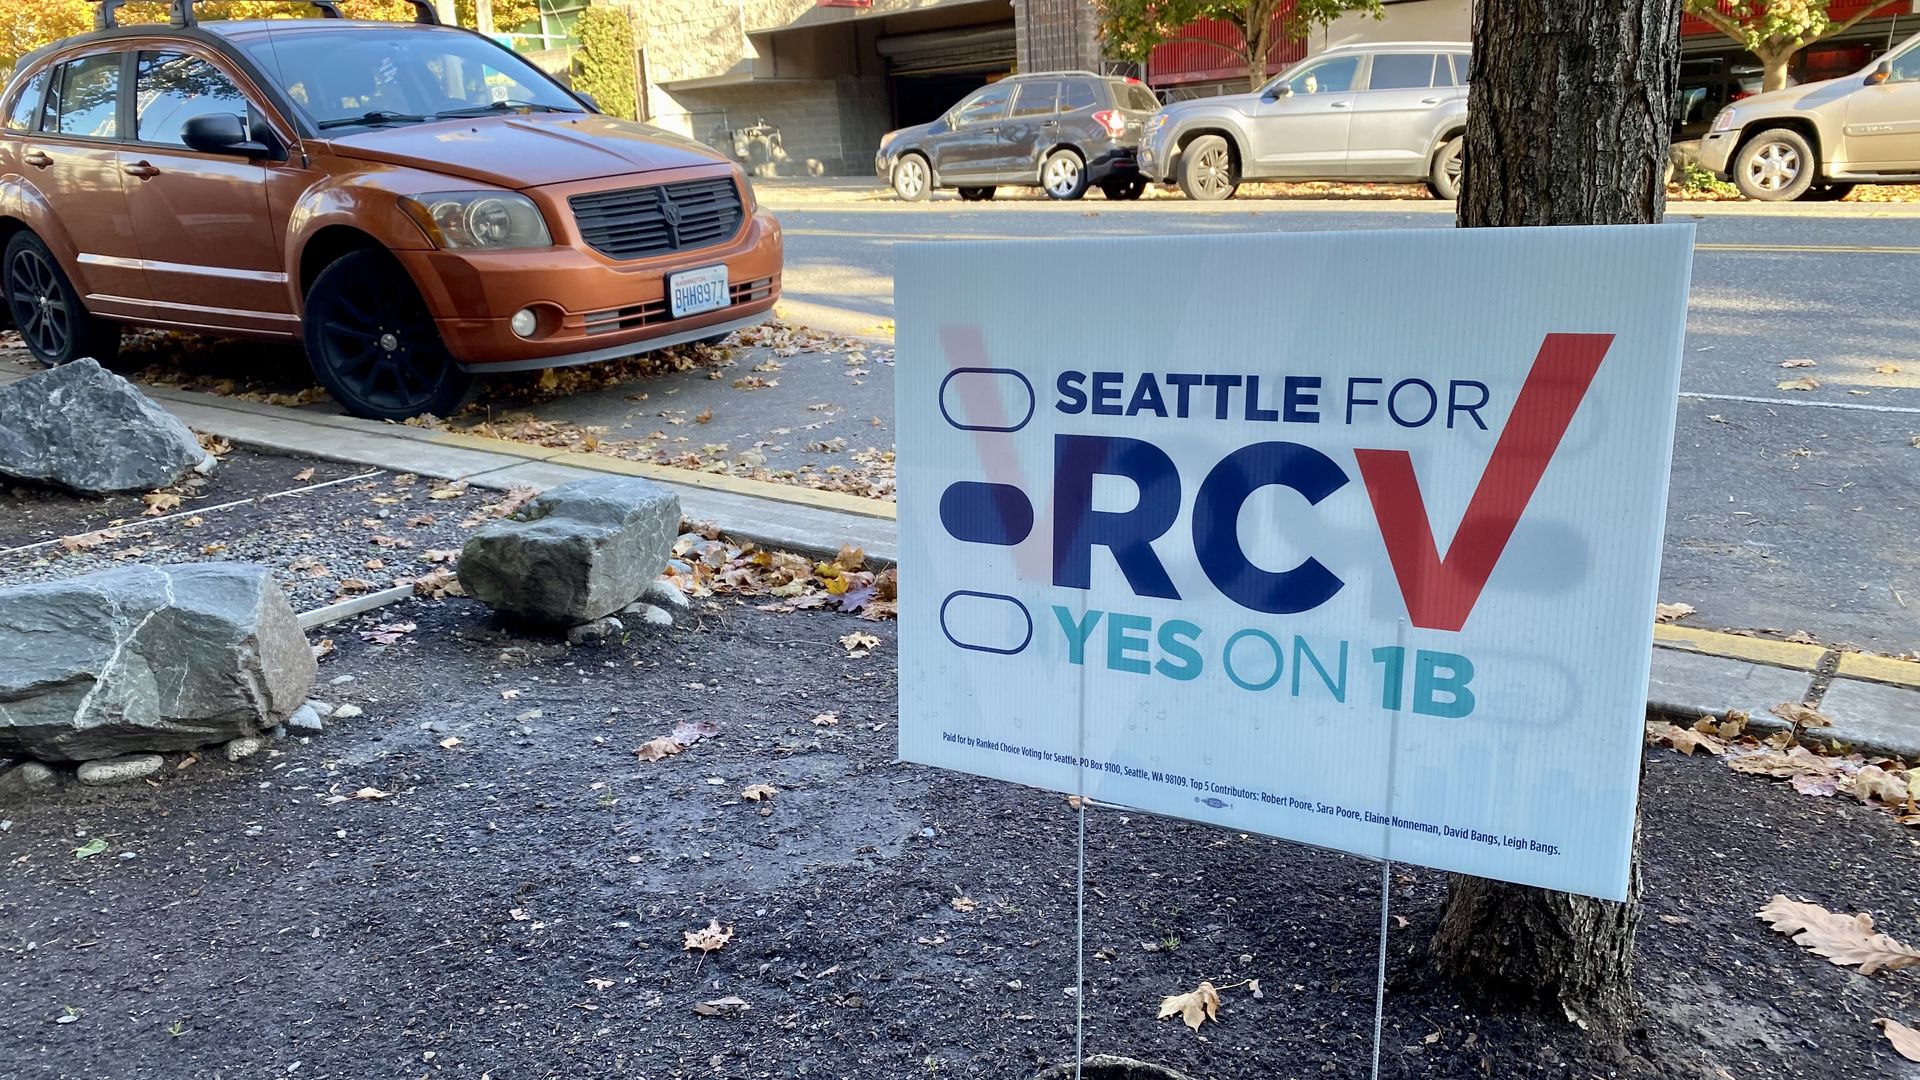 A yard sign along a sidewalk says "Seattle for RCV" and "Yes on 1B"